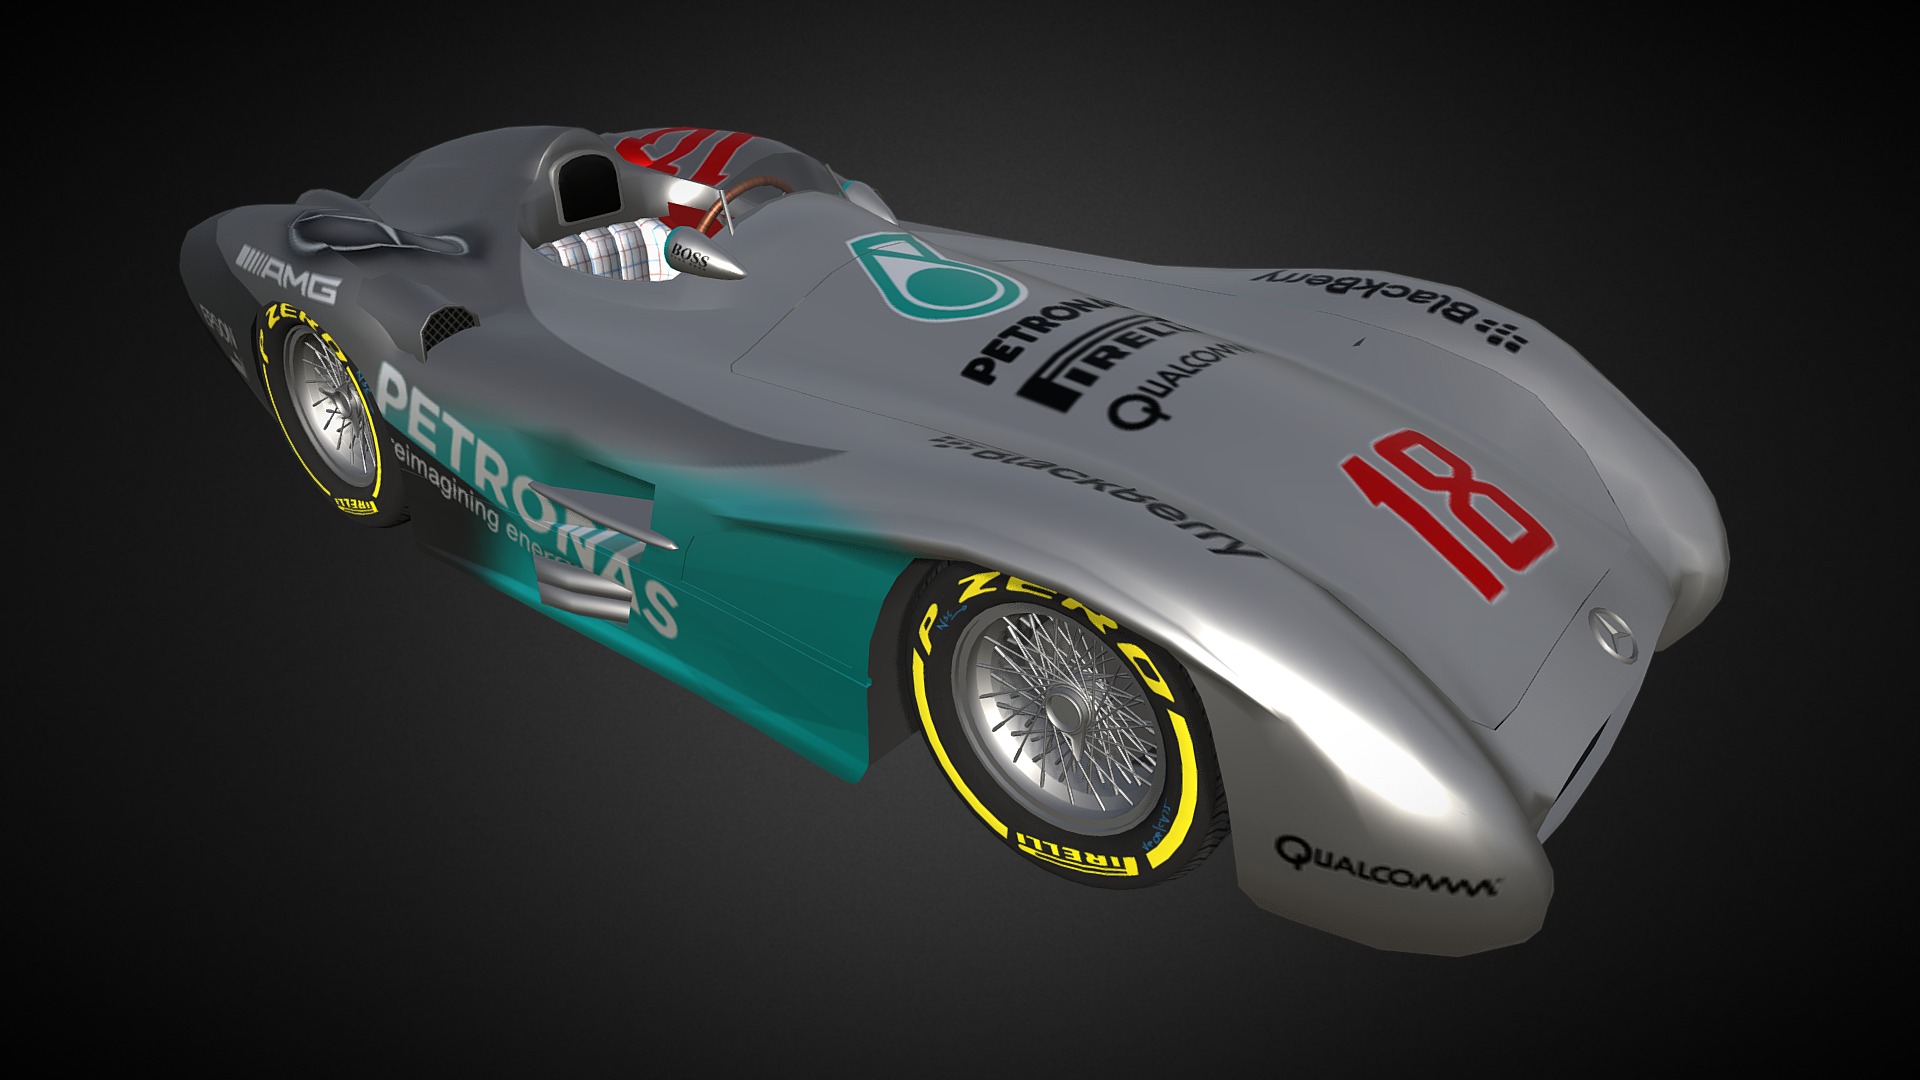 3D model Mercedes Benz W196 - This is a 3D model of the Mercedes Benz W196. The 3D model is about a race car with a logo.